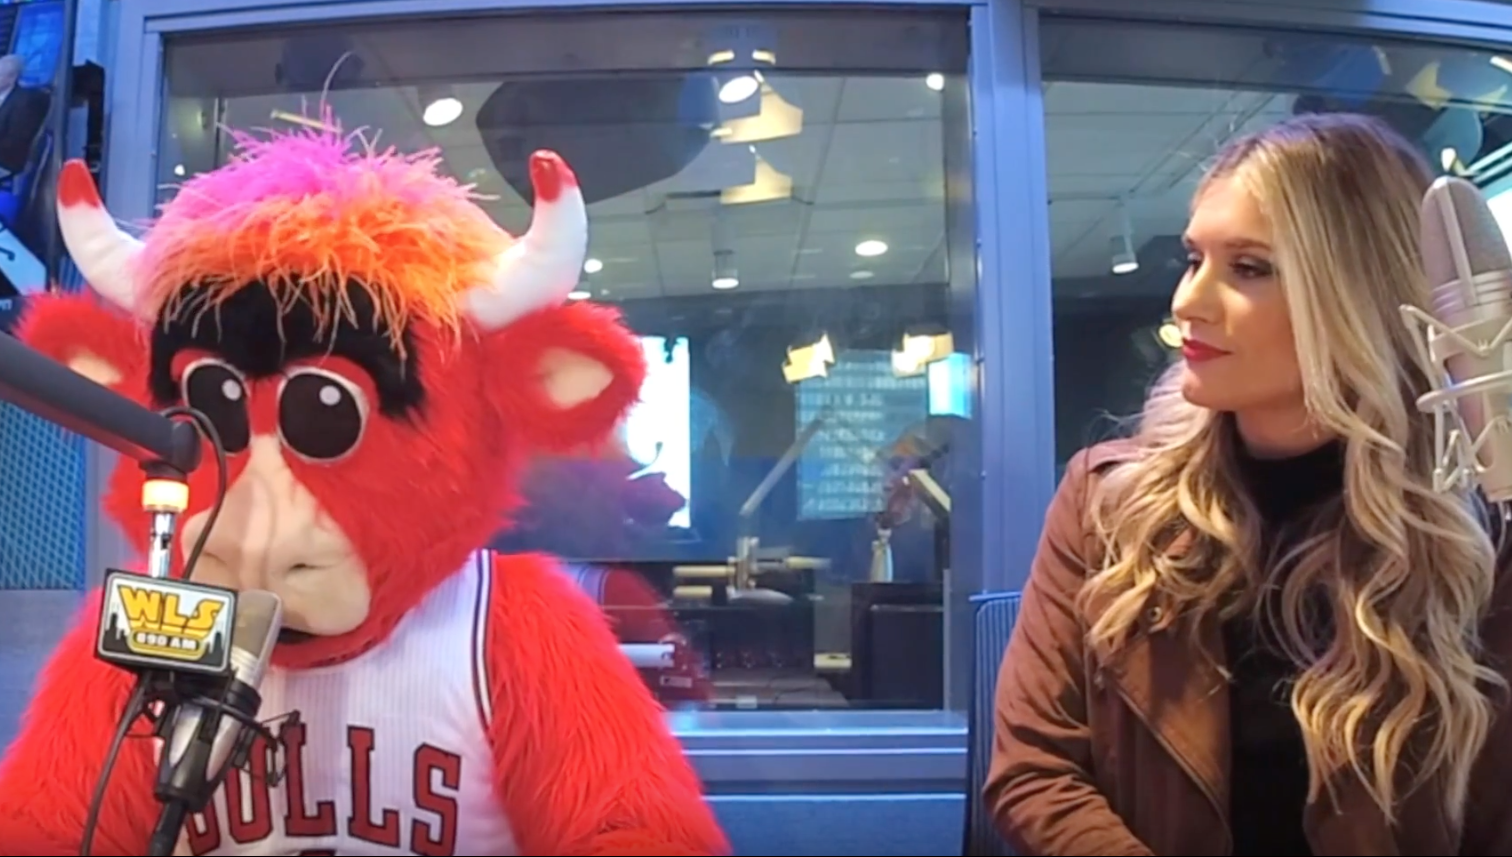 Vote for Benny the Bull!